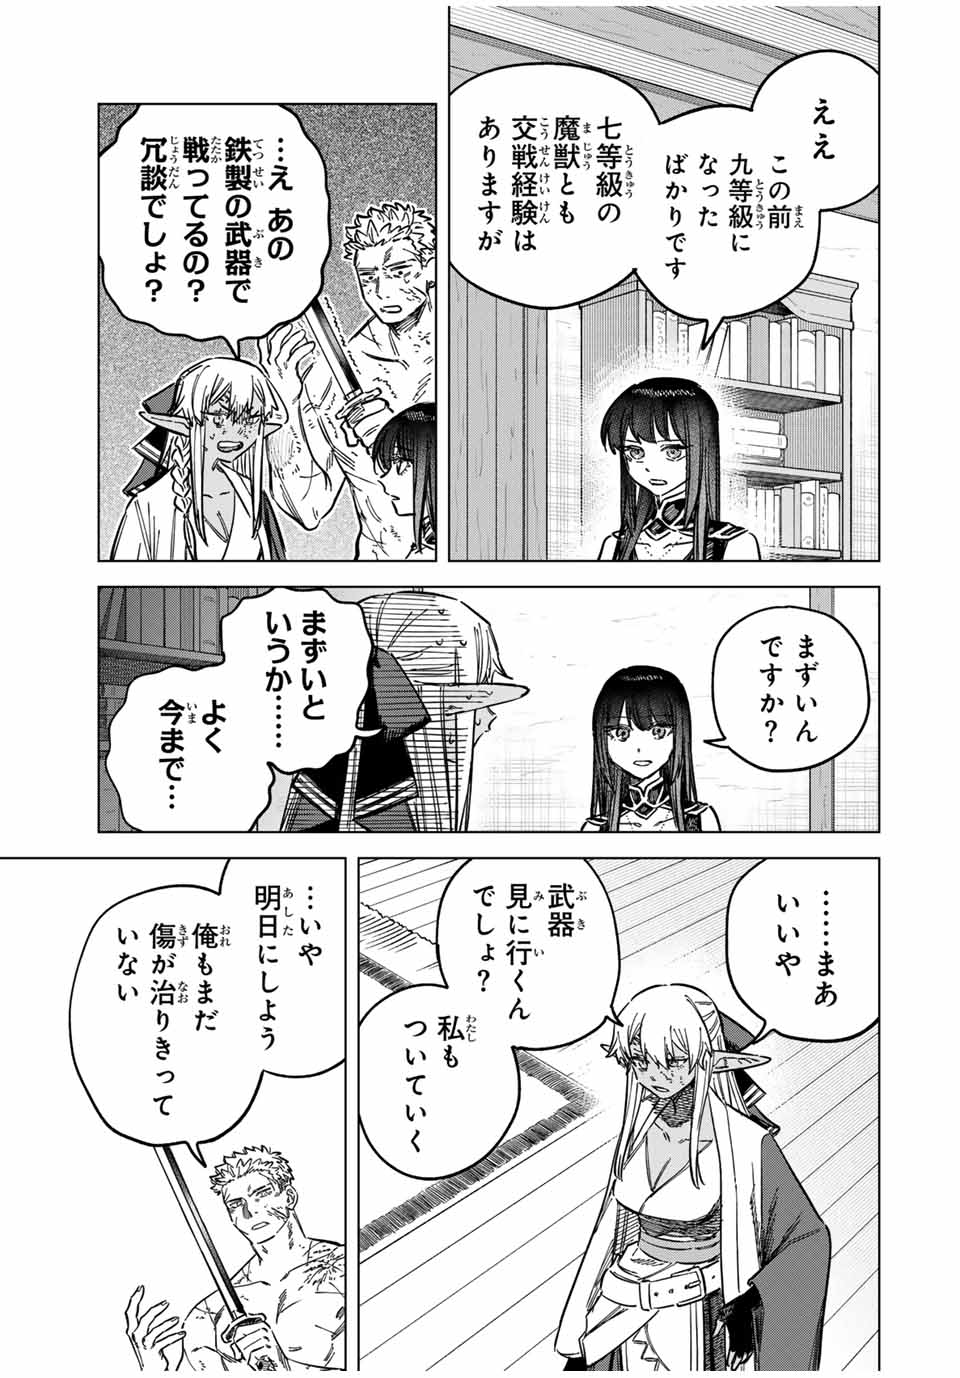 Witch and Mercenary 魔女と傭兵 第14.2話 - Page 12